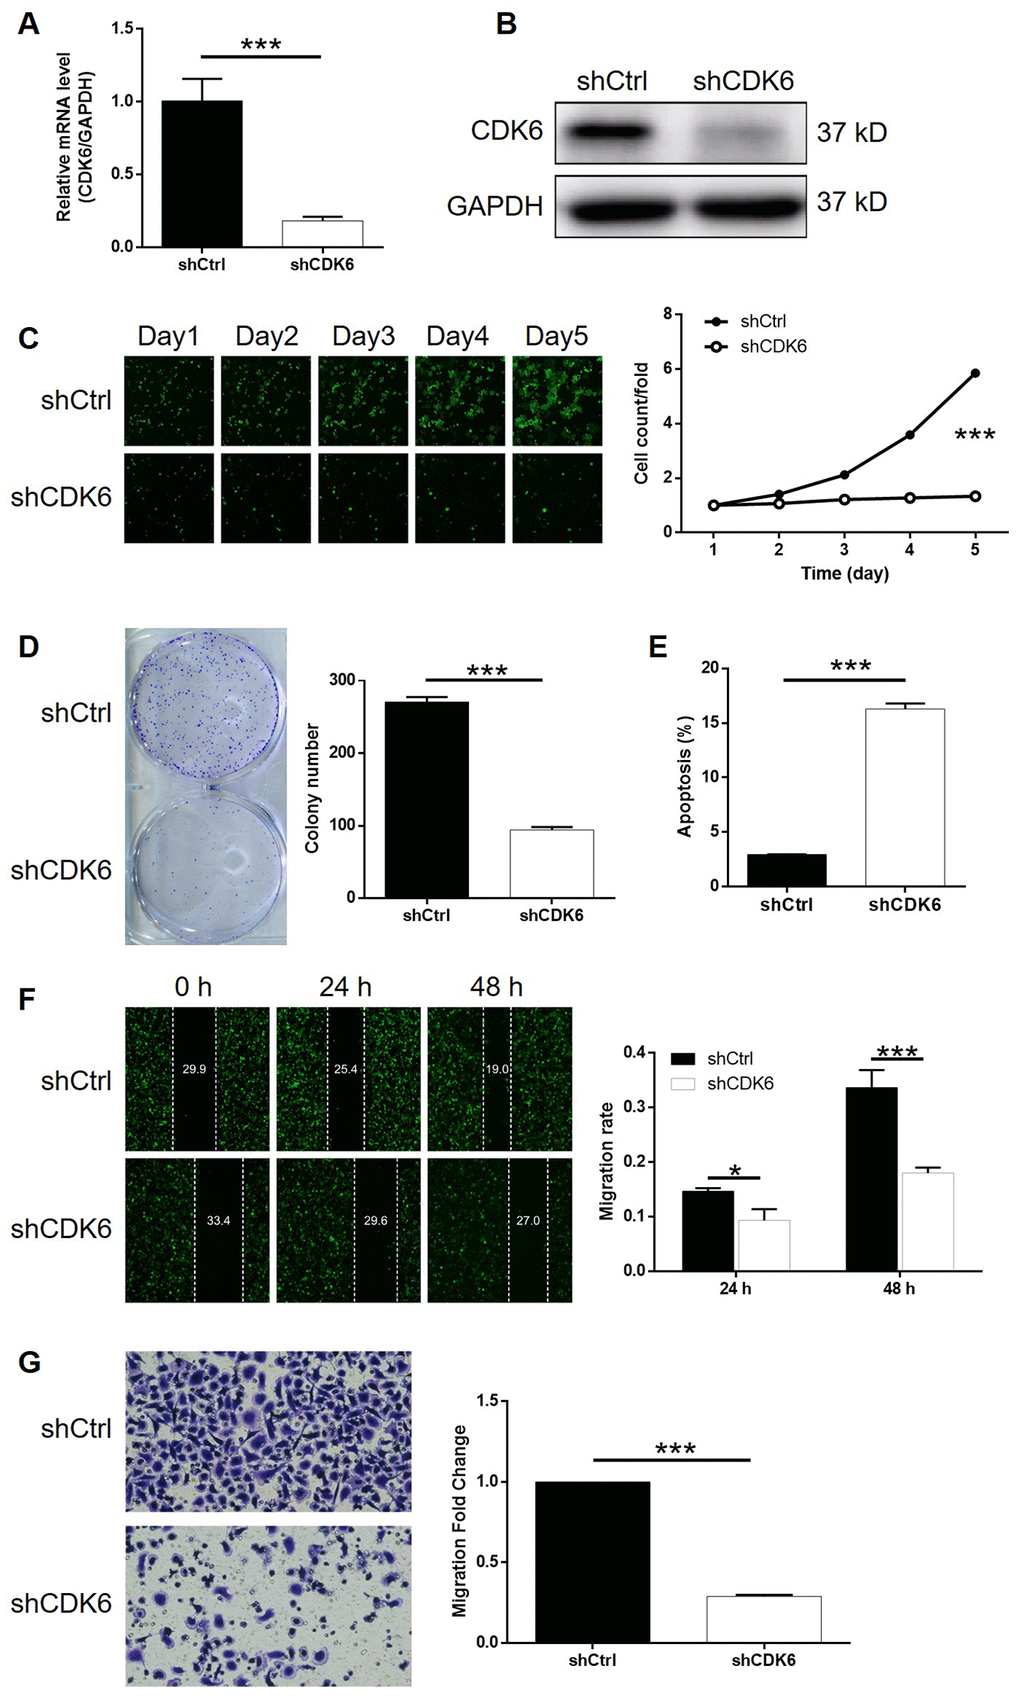 CDK6 knockdown inhibited gastric cancer development in vitro. (A, B) Cell models with or without CDK6 knockdown were constructed by transfecting shCDK6 or shCtrl. The knockdown efficiency of UAP1L1 in SGC-7901 cells was assessed by qPCR (A) and western blotting (B). (C) Celigo cell counting assay was employed to show the effects of CDK6 on cell proliferation of SGC-7901 cells. (D) Colony formation assay was used to evaluate the ability of SGC-7901 cells with or without CDK6 knockdown to form colonies. (E) Flow cytometry was performed to detect cell apoptosis of SGC-7901 cells with or without CDK6 knockdown. (F, G) The effects of CDK6 on cell migration ability of SGC-7901 cells were evaluated by wound-healing assay (F) and Transwell assay (G). The representative images were selected from at least 3 independent experiments. Data was shown as mean ± SD. *P P P 